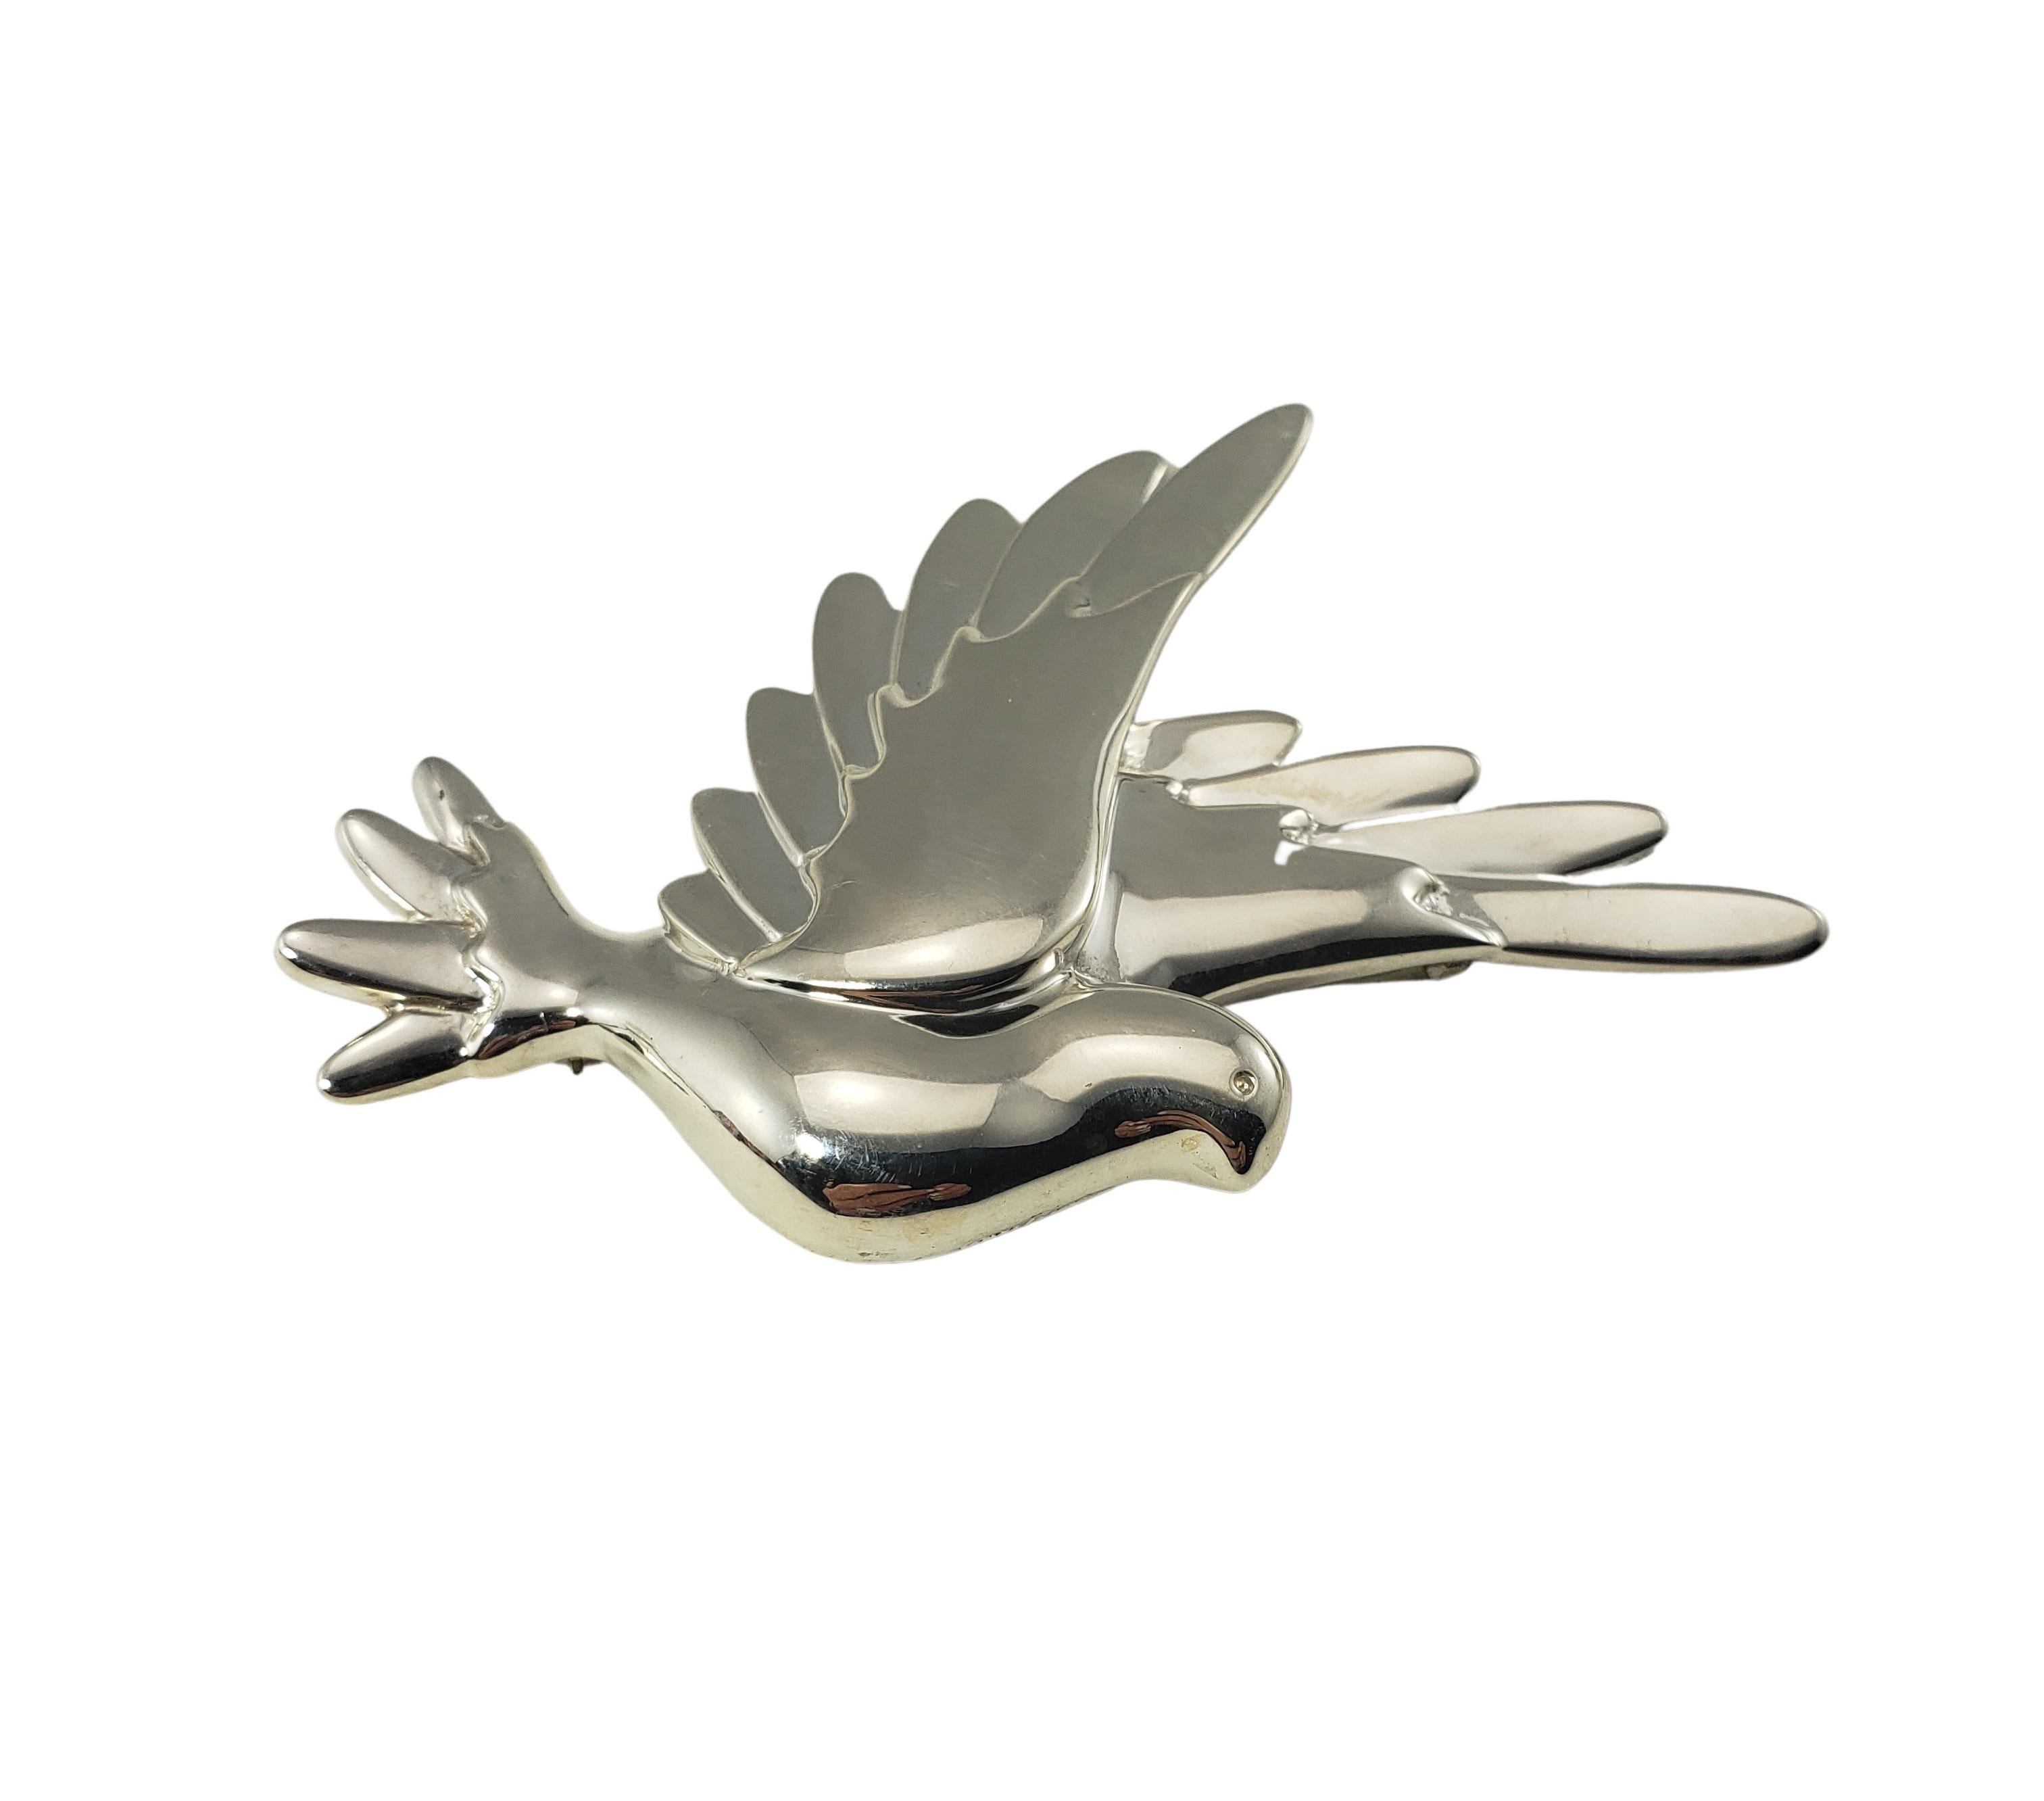 Tiffany & Co. Paloma Picasso Sterling Silver Dove Brooch/Pin-

This stunning brooch features a beautifully detailed dove crafted in sterling silver by Paloma Picasso for Tiffany & Co.

Size: 3 inches x 2  1/2 inches 

Weight:  17.1 dwt. /  26.7